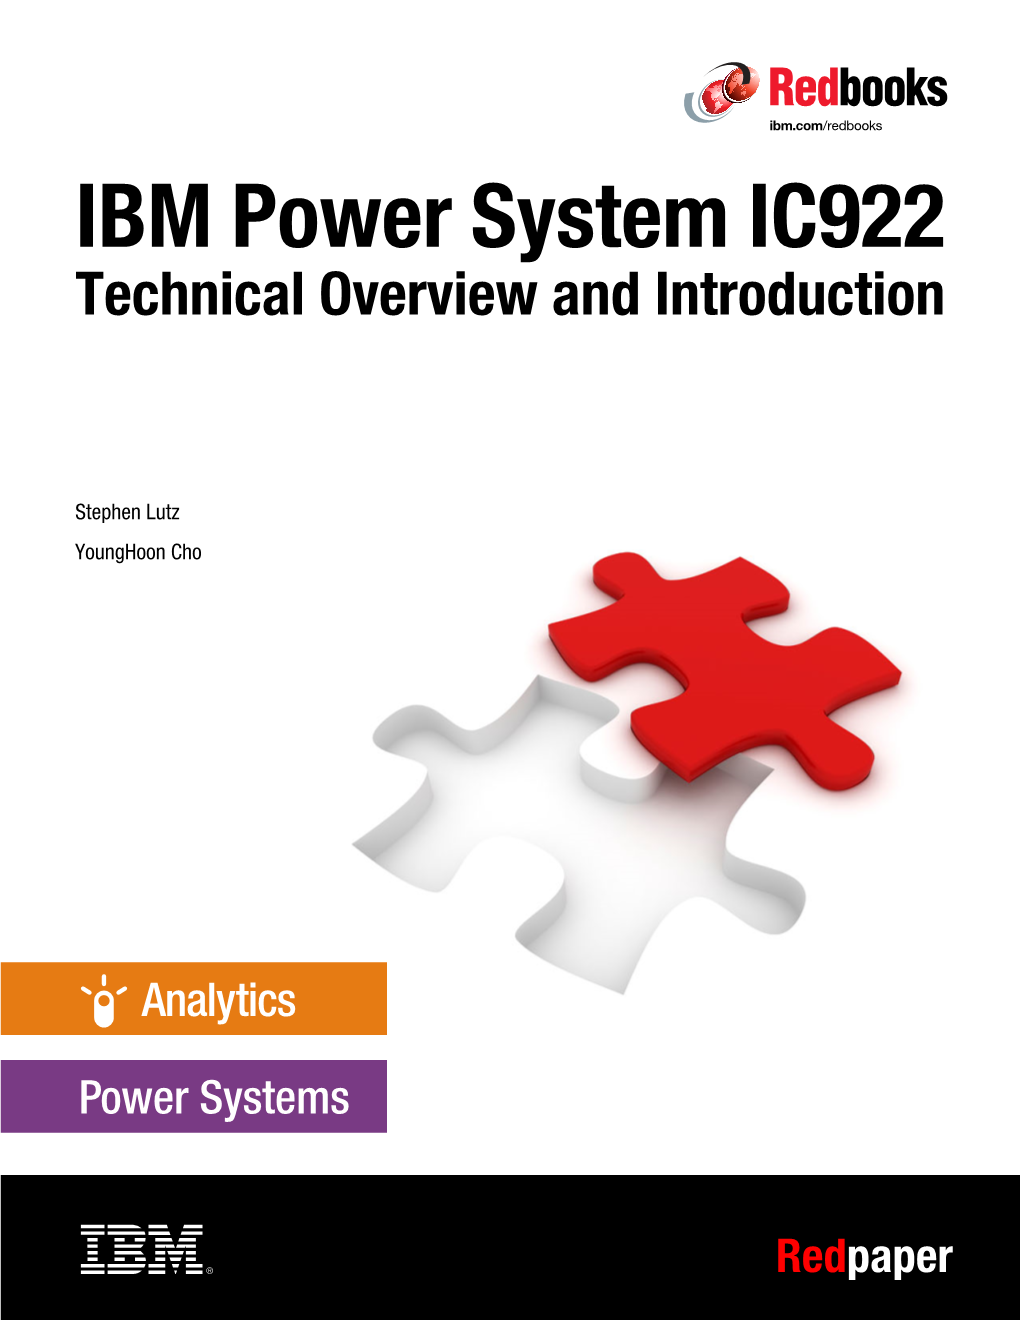 IBM Power System IC922: Technical Overview and Introduction